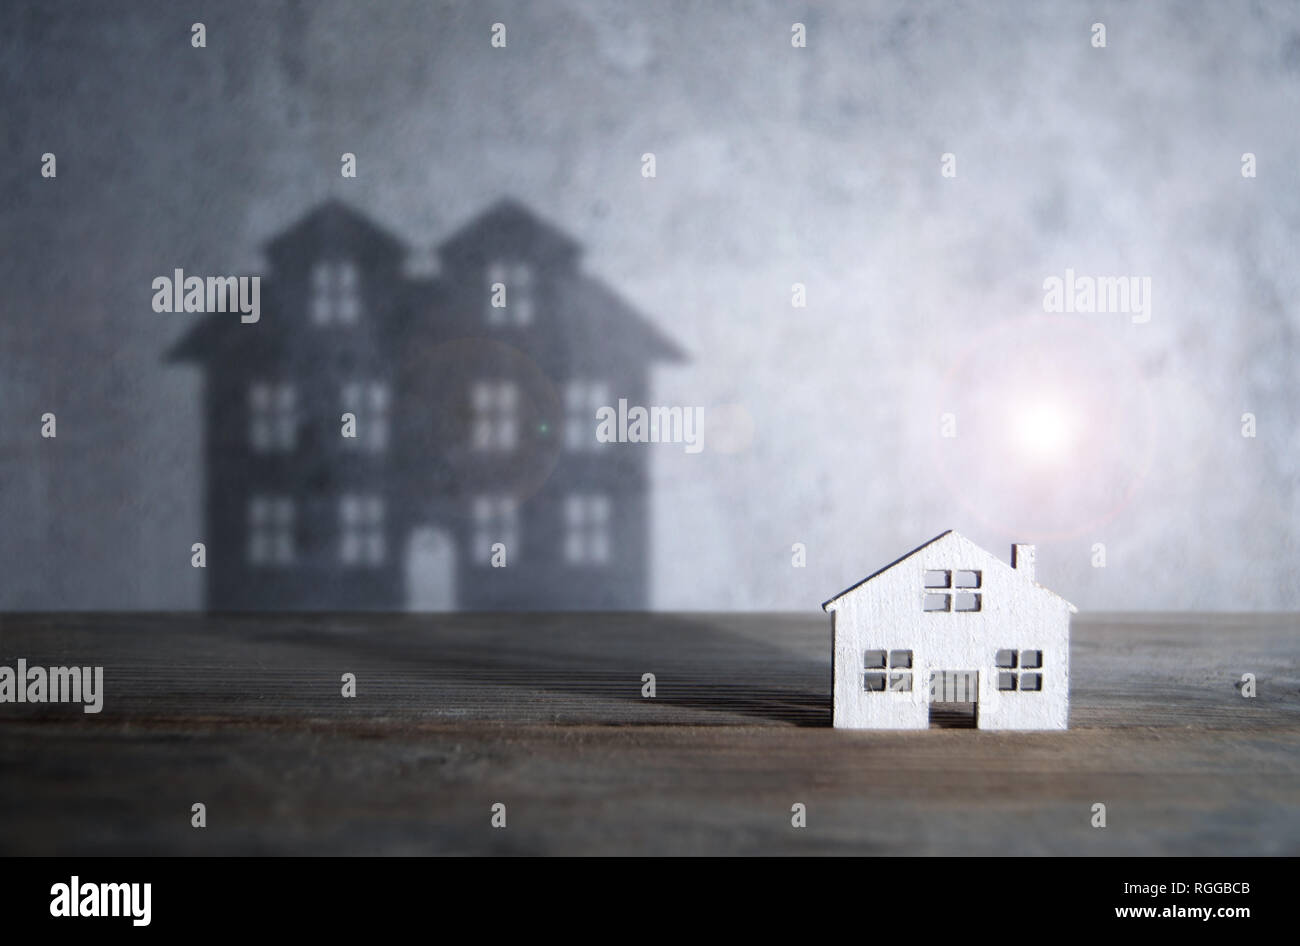 Shadow of a large house emerging from a miniature home Stock Photo